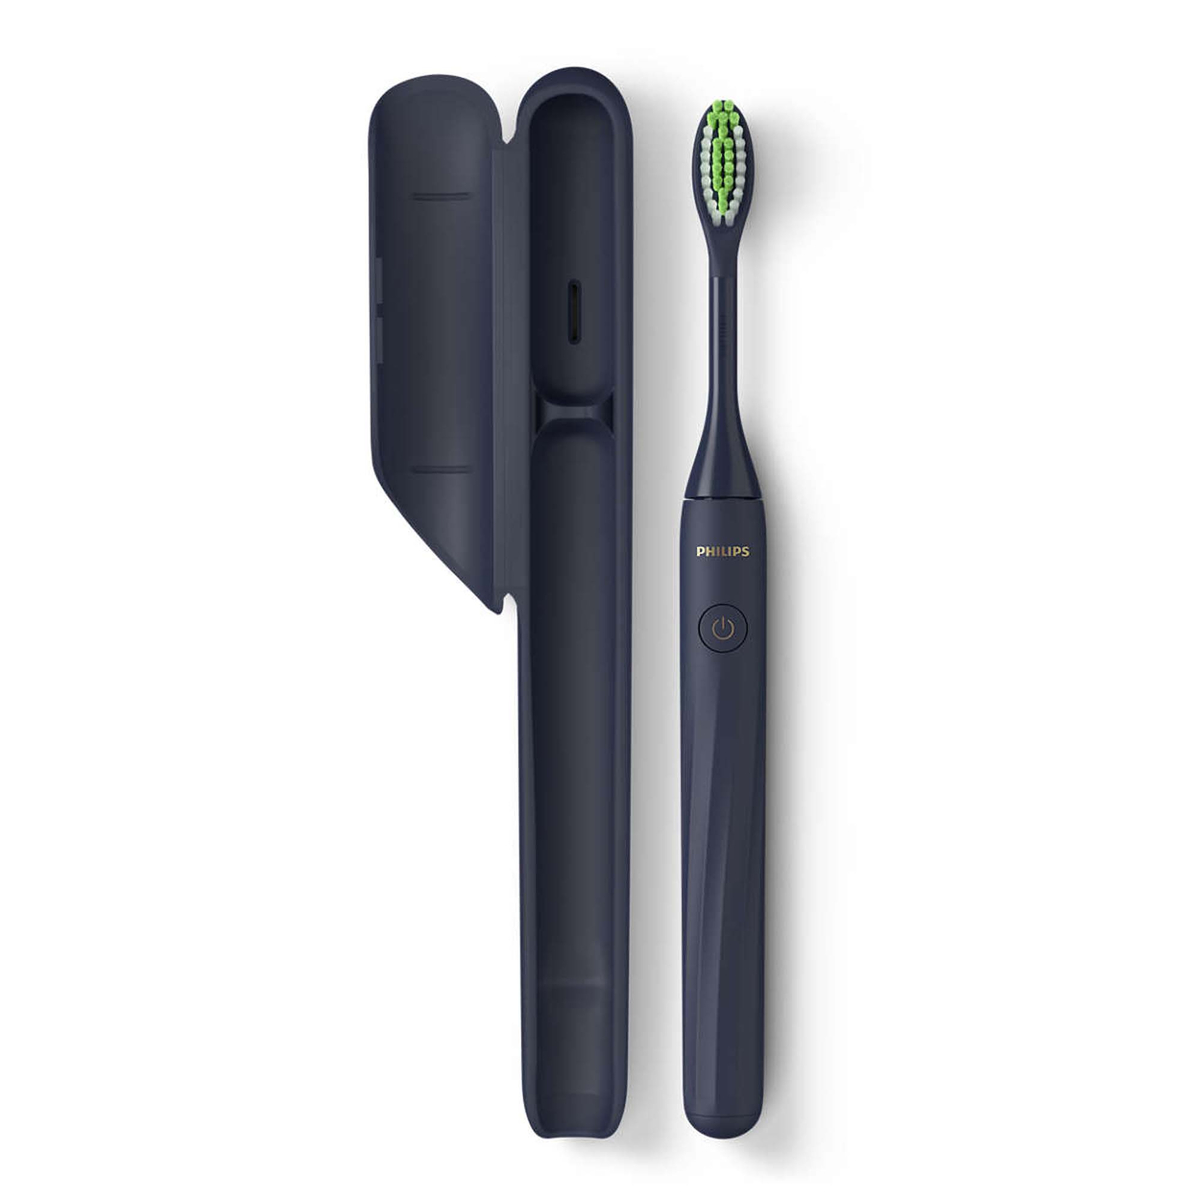 Philips One by Sonicare Battery Toothbrush Midnight Blue HY1100/04 + 2 Philips One by Sonicare Brush head Midnight Blue BH1022/04